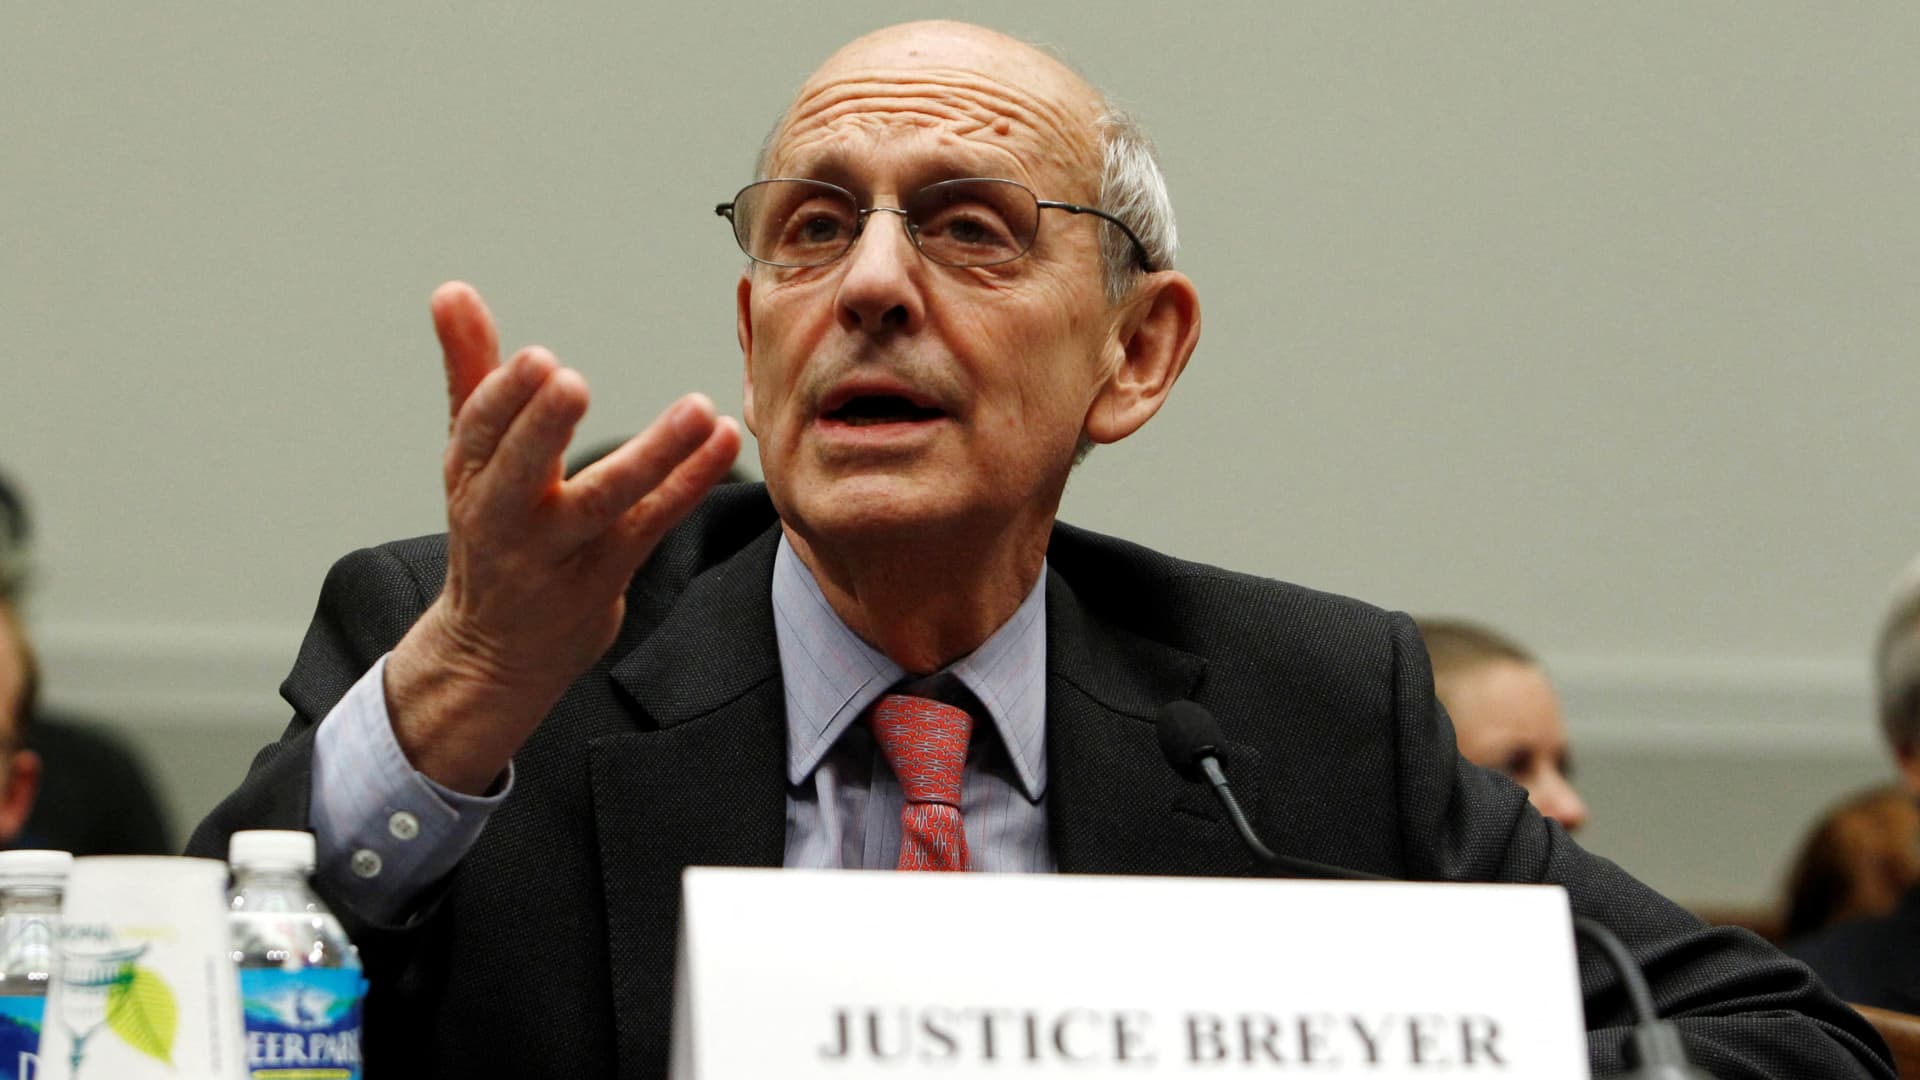 Supreme Court Justice Stephen Breyer testifies before a House Judiciary Commercial and Administrative Law Subcommittee hearing on The Administrative Conference of the United States on Capitol Hill in Washington May 20, 2010.